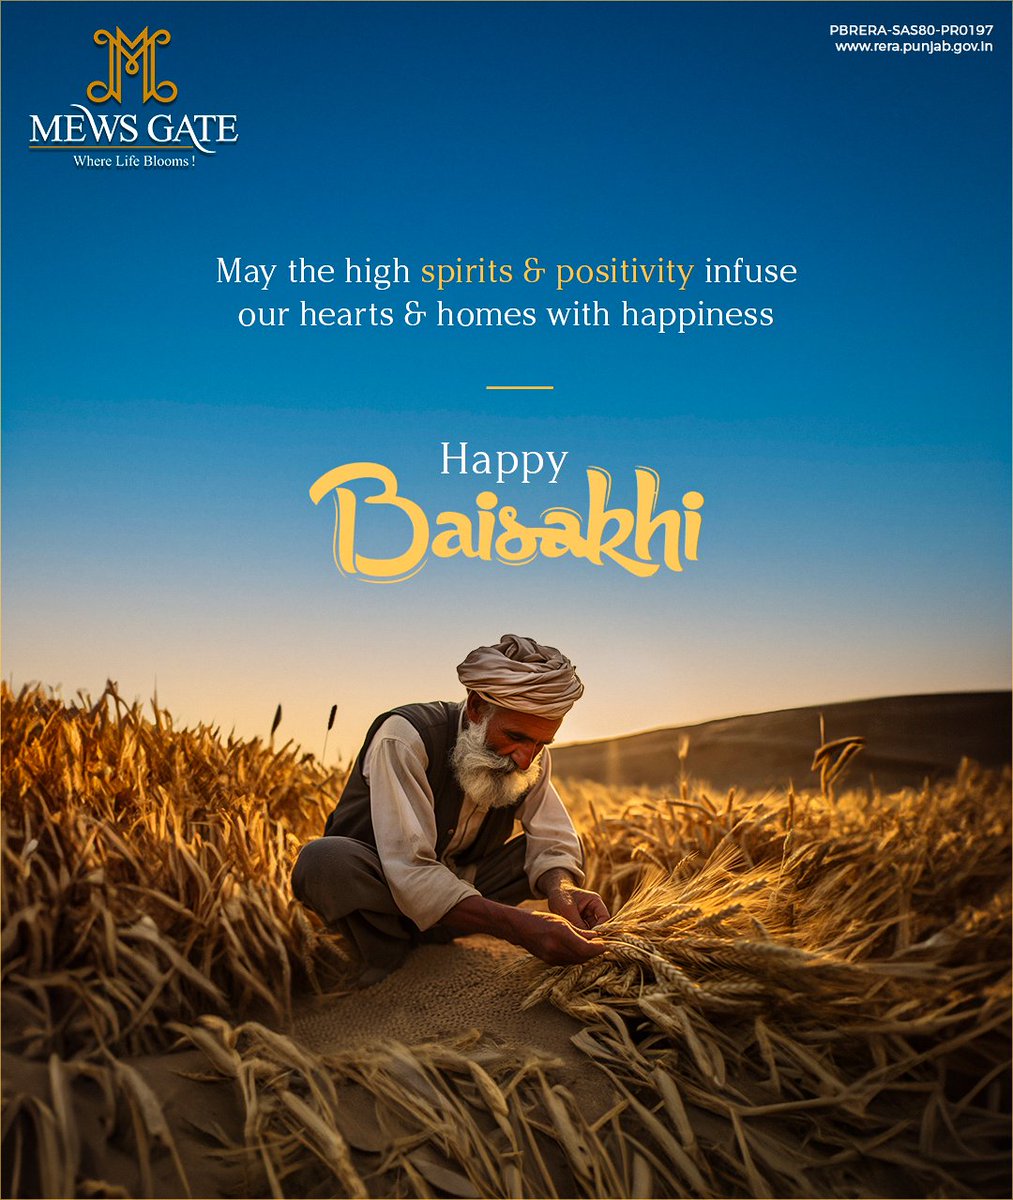 May the radiant energy of Baisakhi infuse our homes and hearts with joy, positivity, and abundance. Happy Baisakhi to all #MewsGate #HappyBaisakhi #HarvestSeason #Success #IndianFestival #Culture #Togtherness #Growth #Happiness #Prosperity